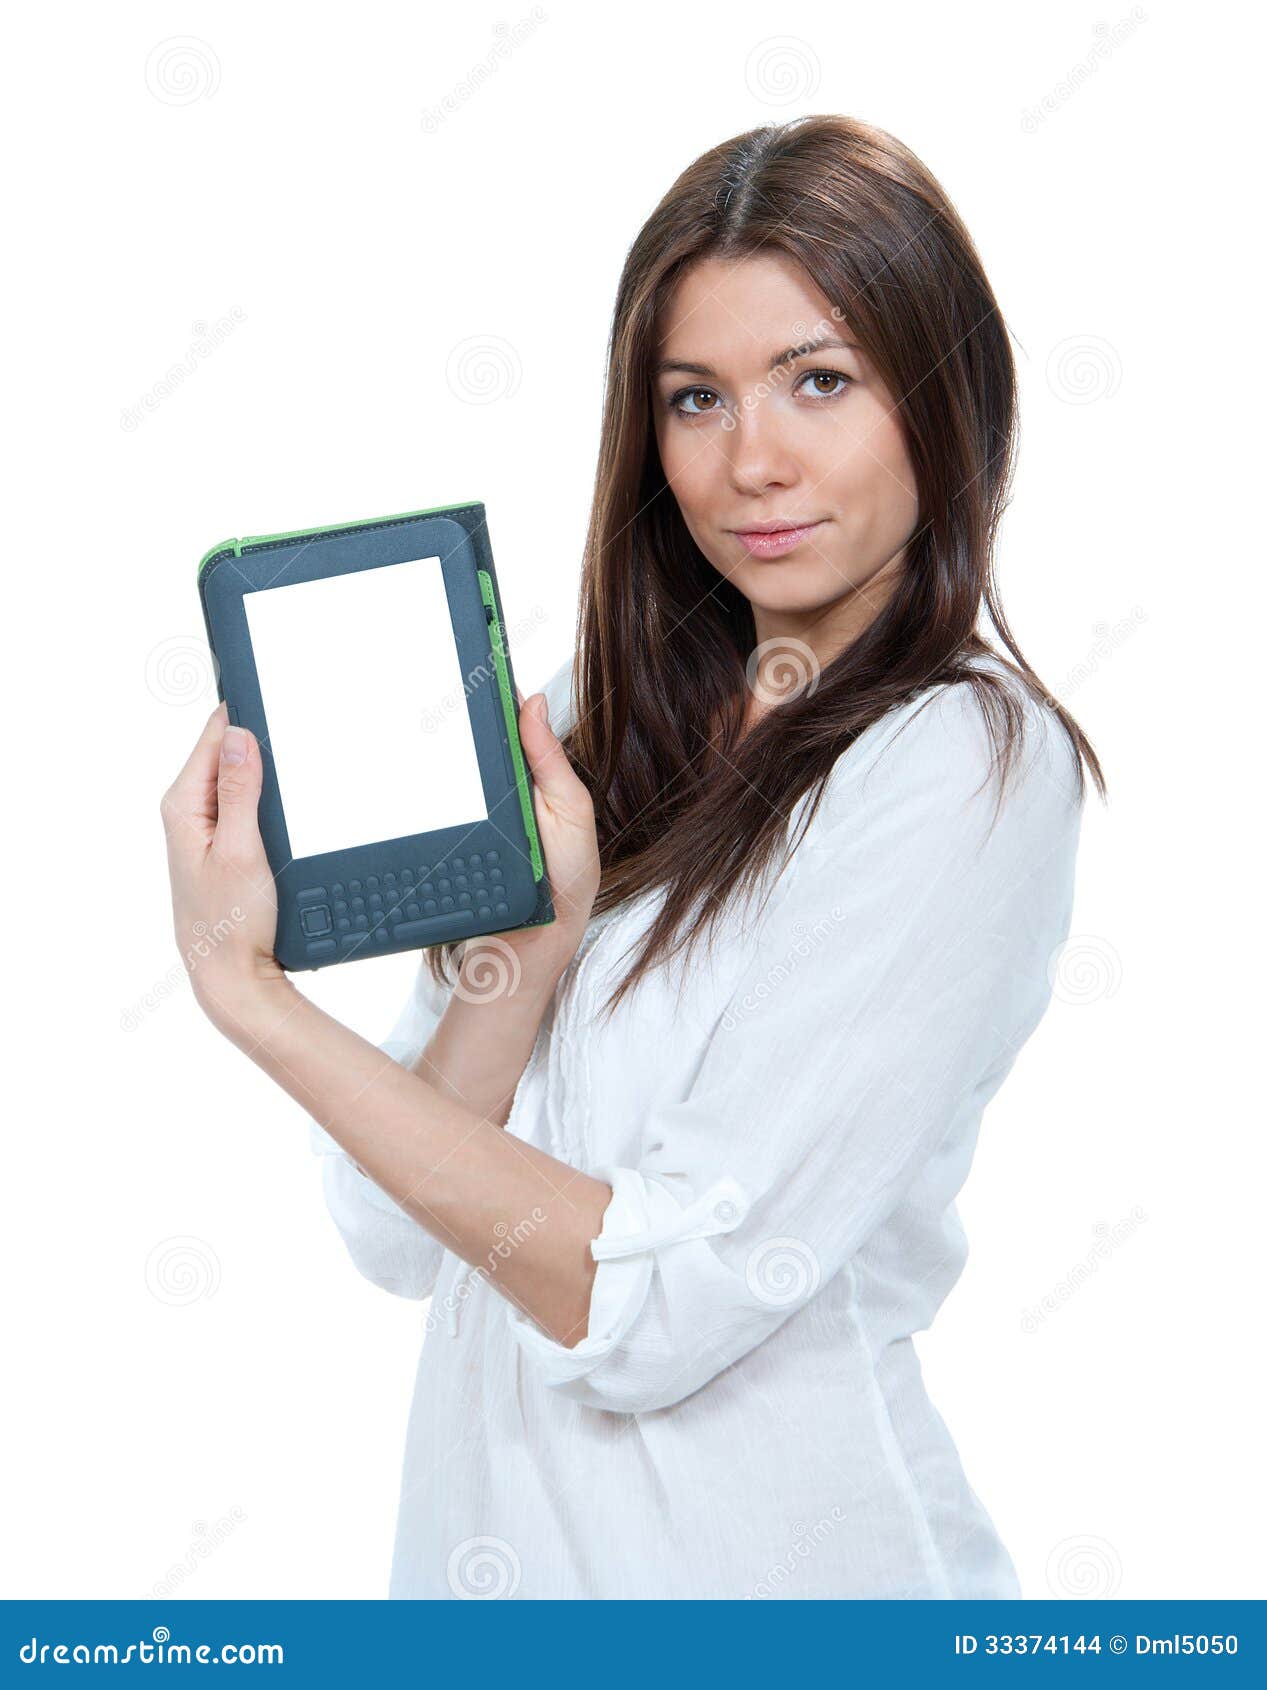 ebook fifty shades of